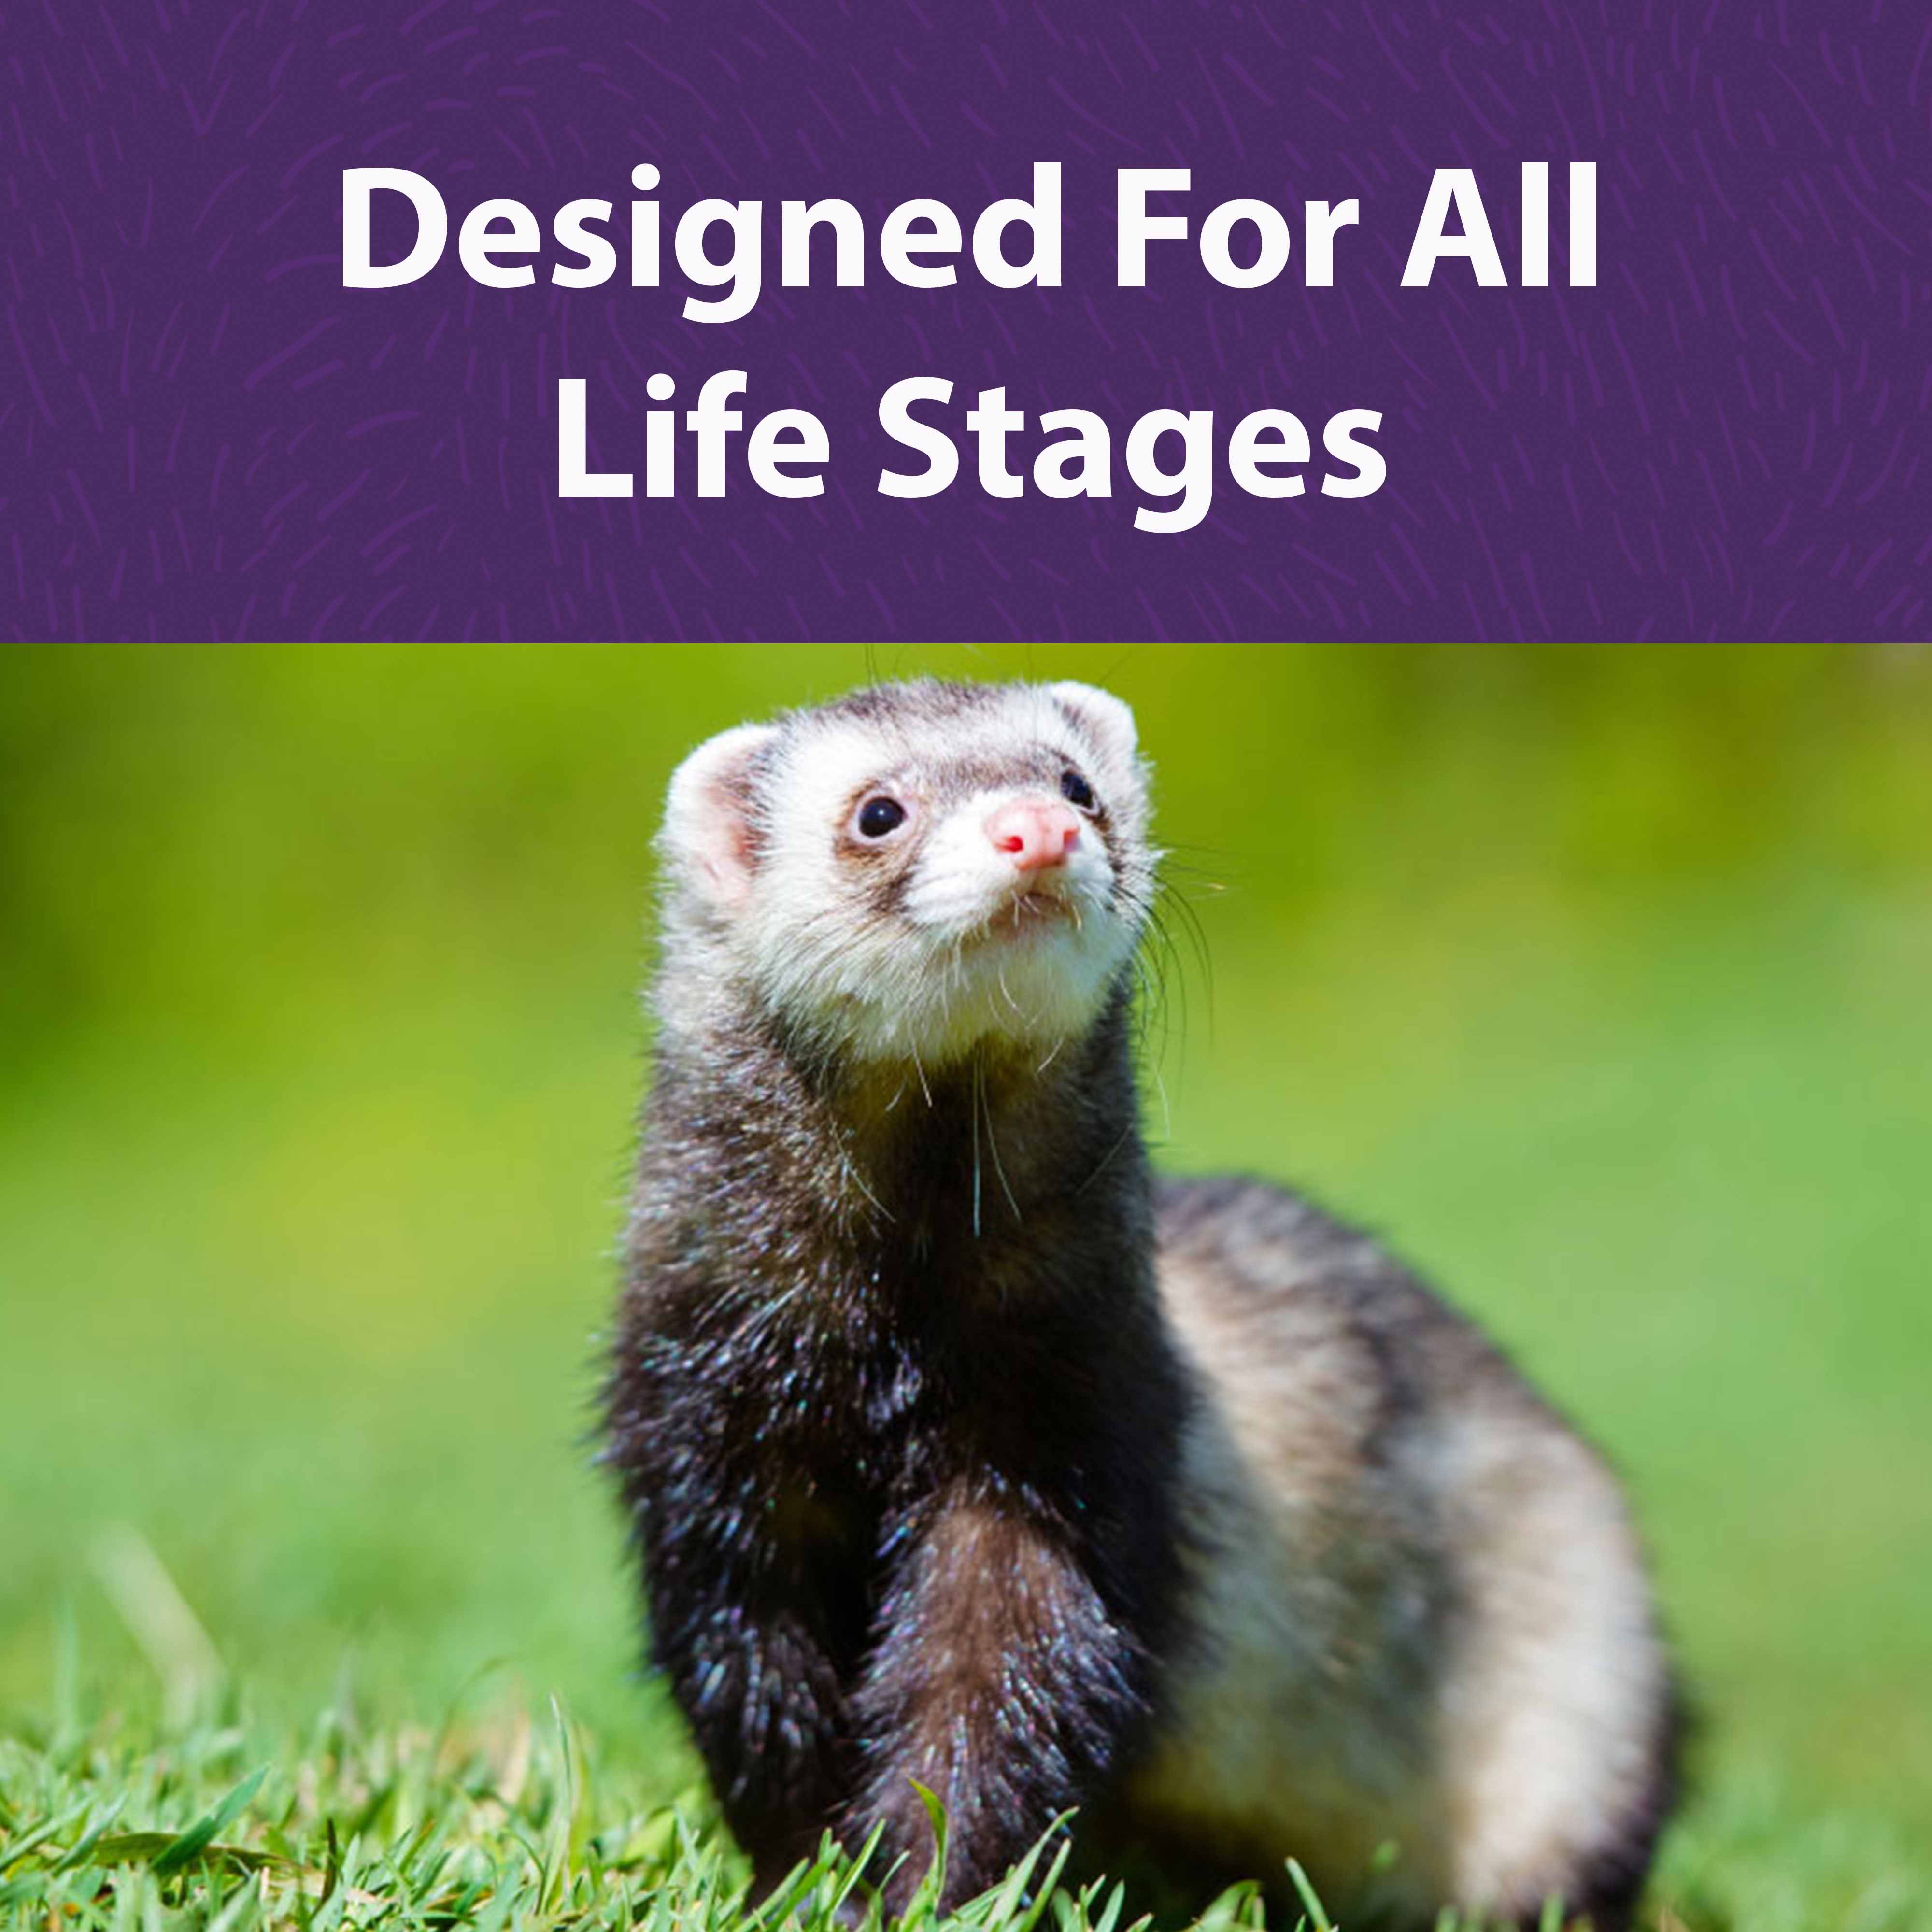 Designed For All Life Stages